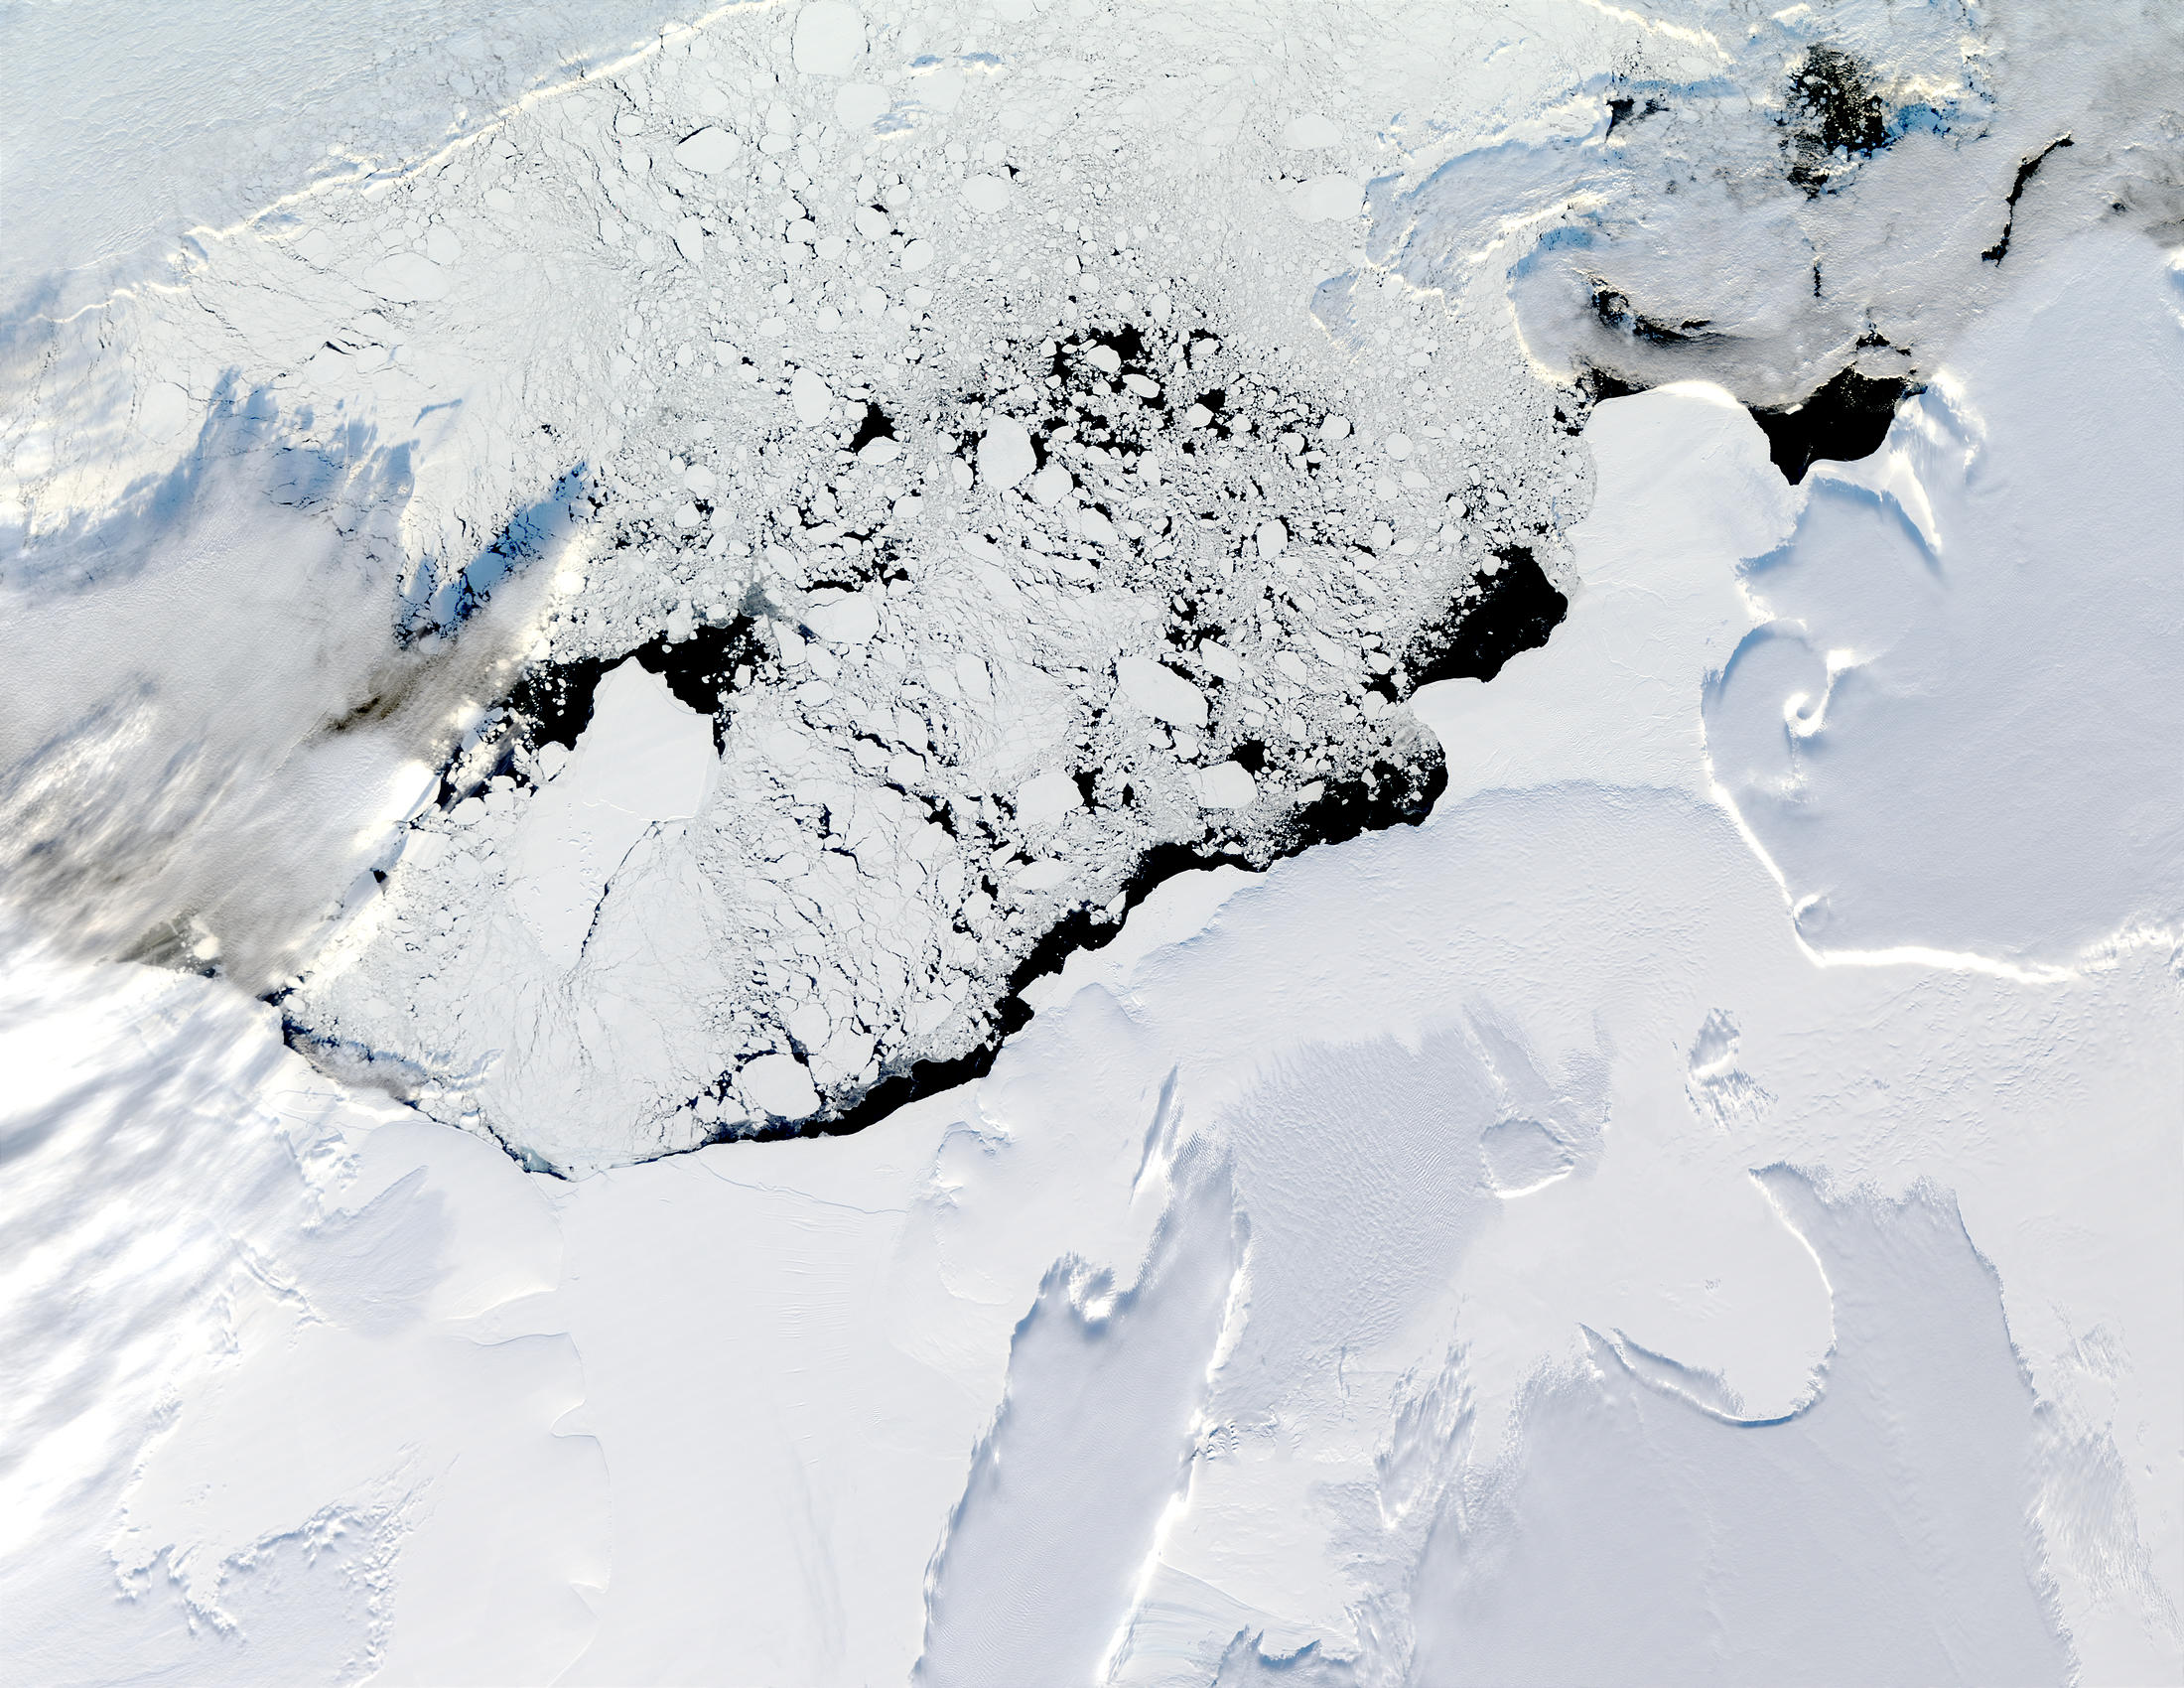 Weddell Sea, Antarctica - related image preview